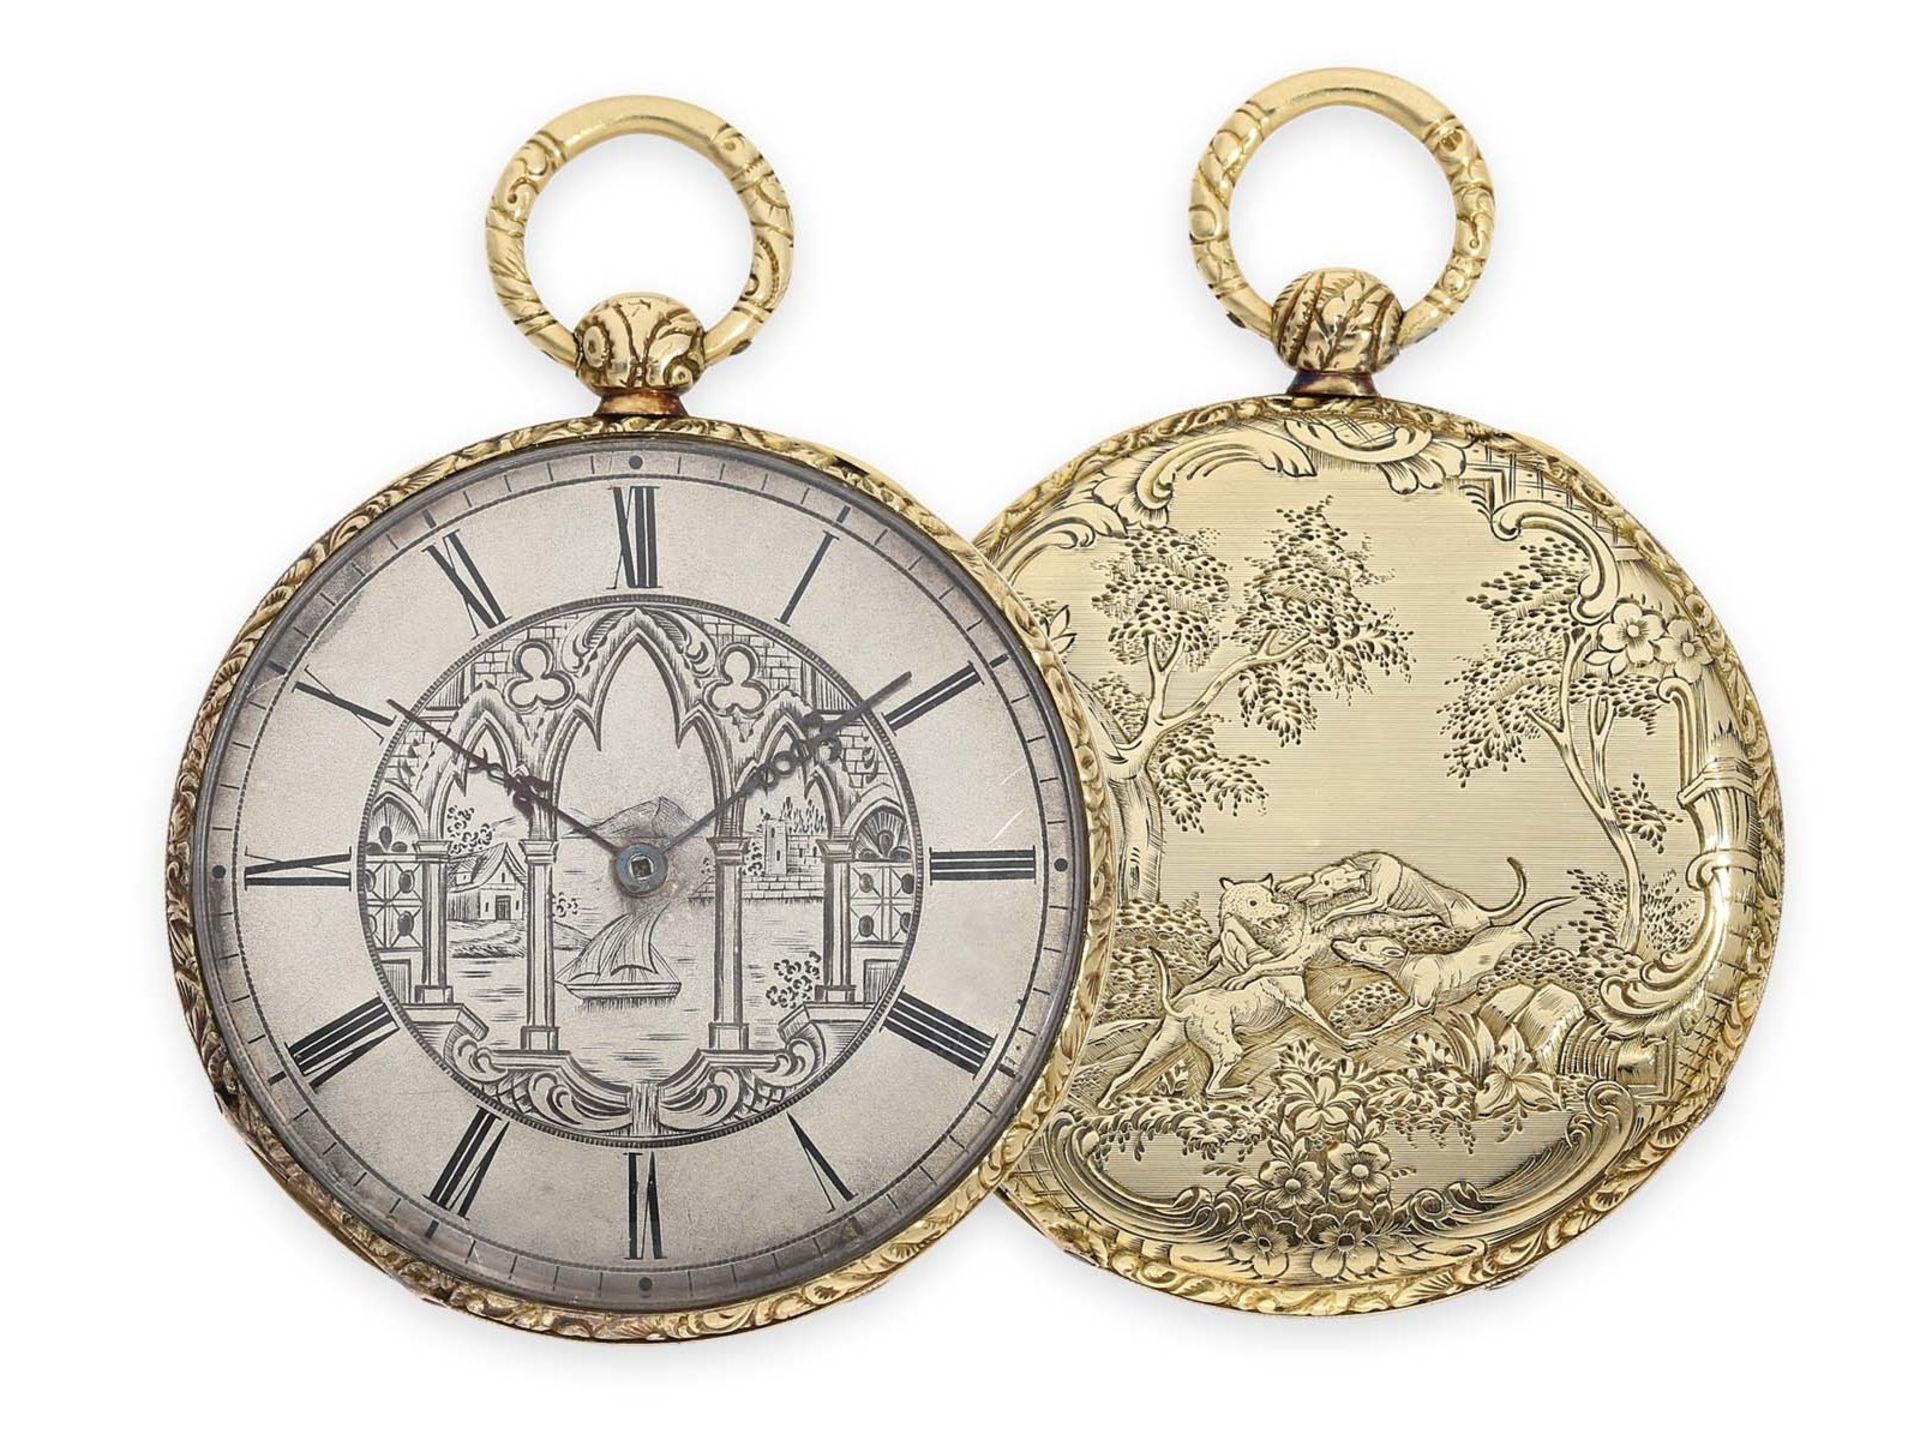 Pocket watch: extremely thin Lepine with rare Bagnolet calibre and extremely elaborate case and dial